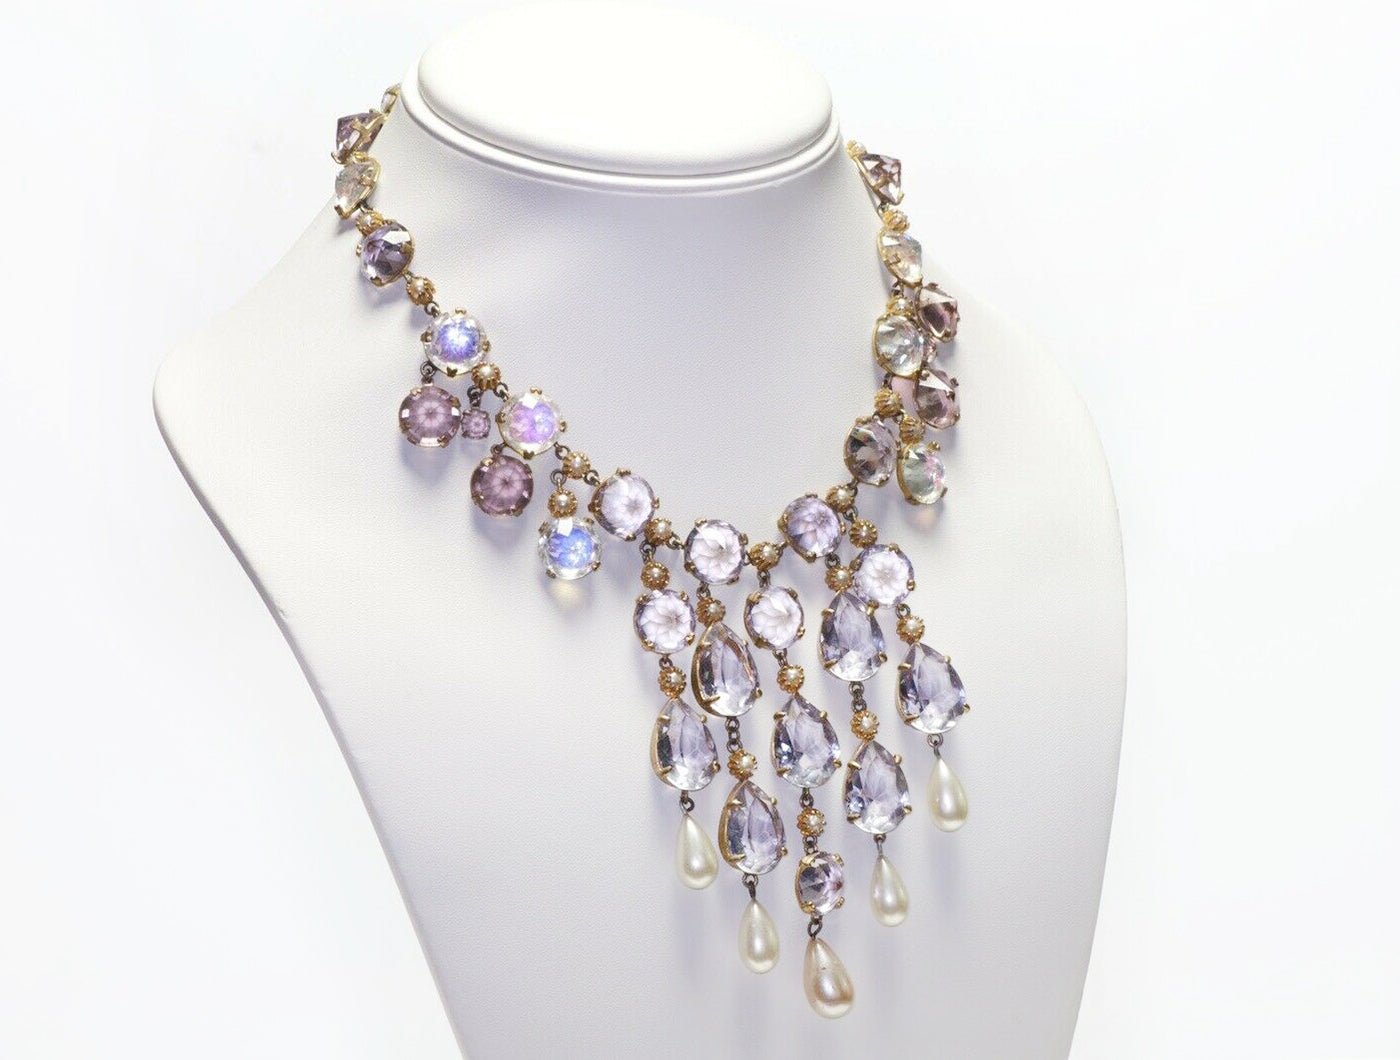 Christian Dior 1950’s by Yves Saint Laurent Purple Crystal Pearl Collar Necklace